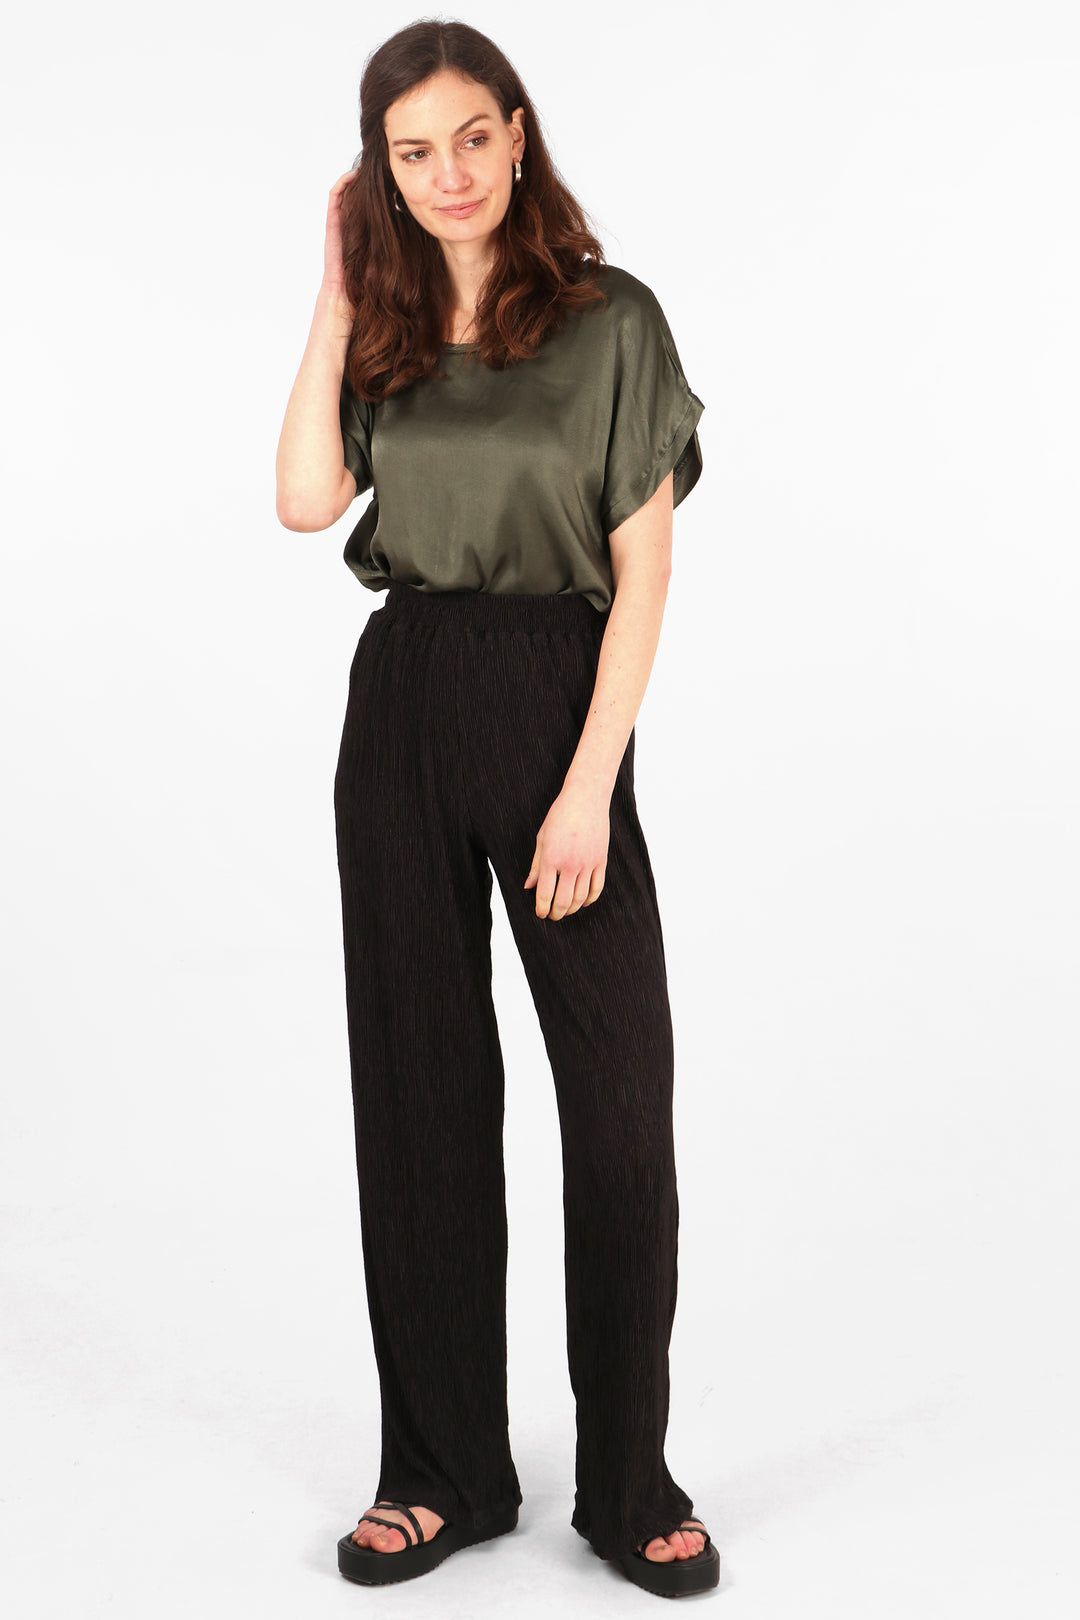 model wearing long black summer plisse trousers with an elasticated smocked waist